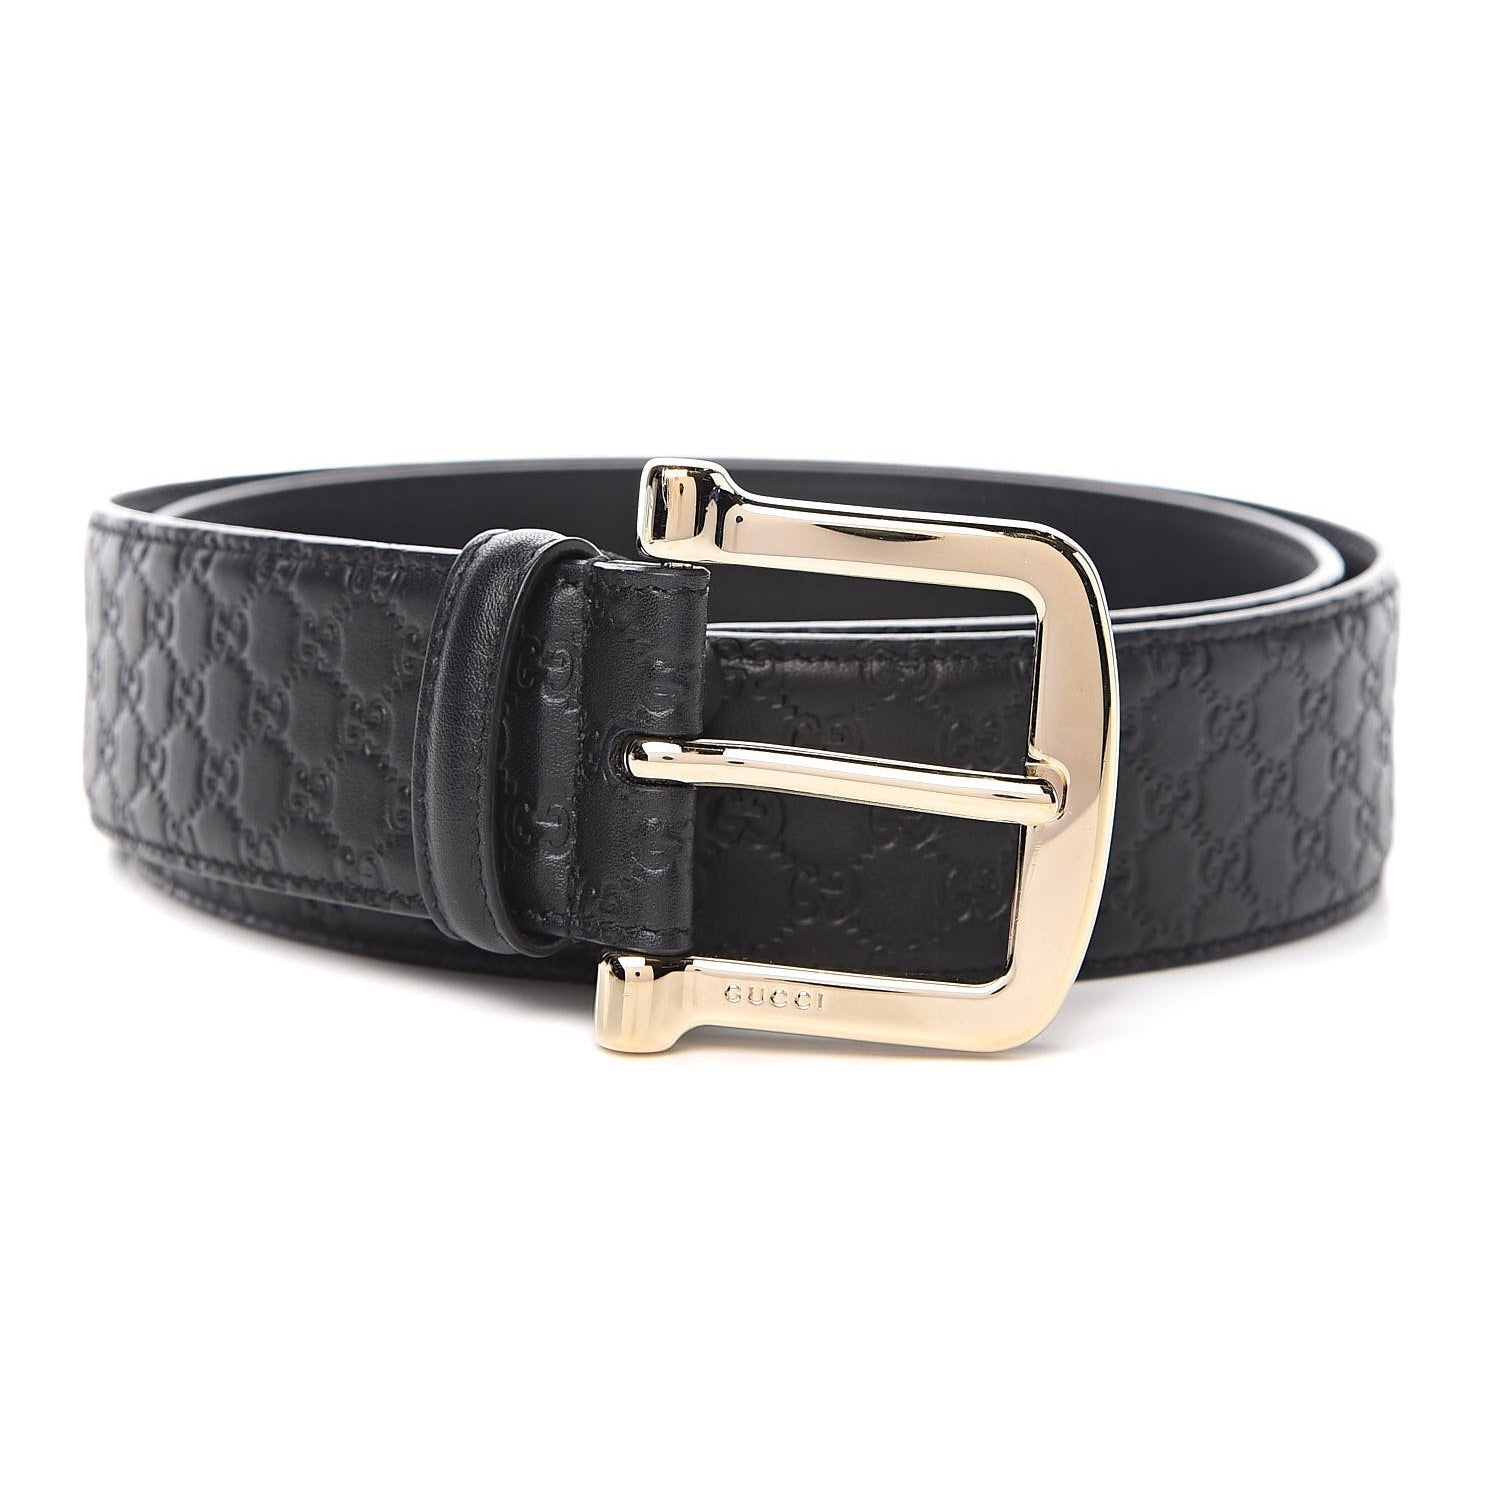 Gucci Microguccissima Navy Leather Silver Buckle Belt 100/40 449716 at_Queen_Bee_of_Beverly_Hills